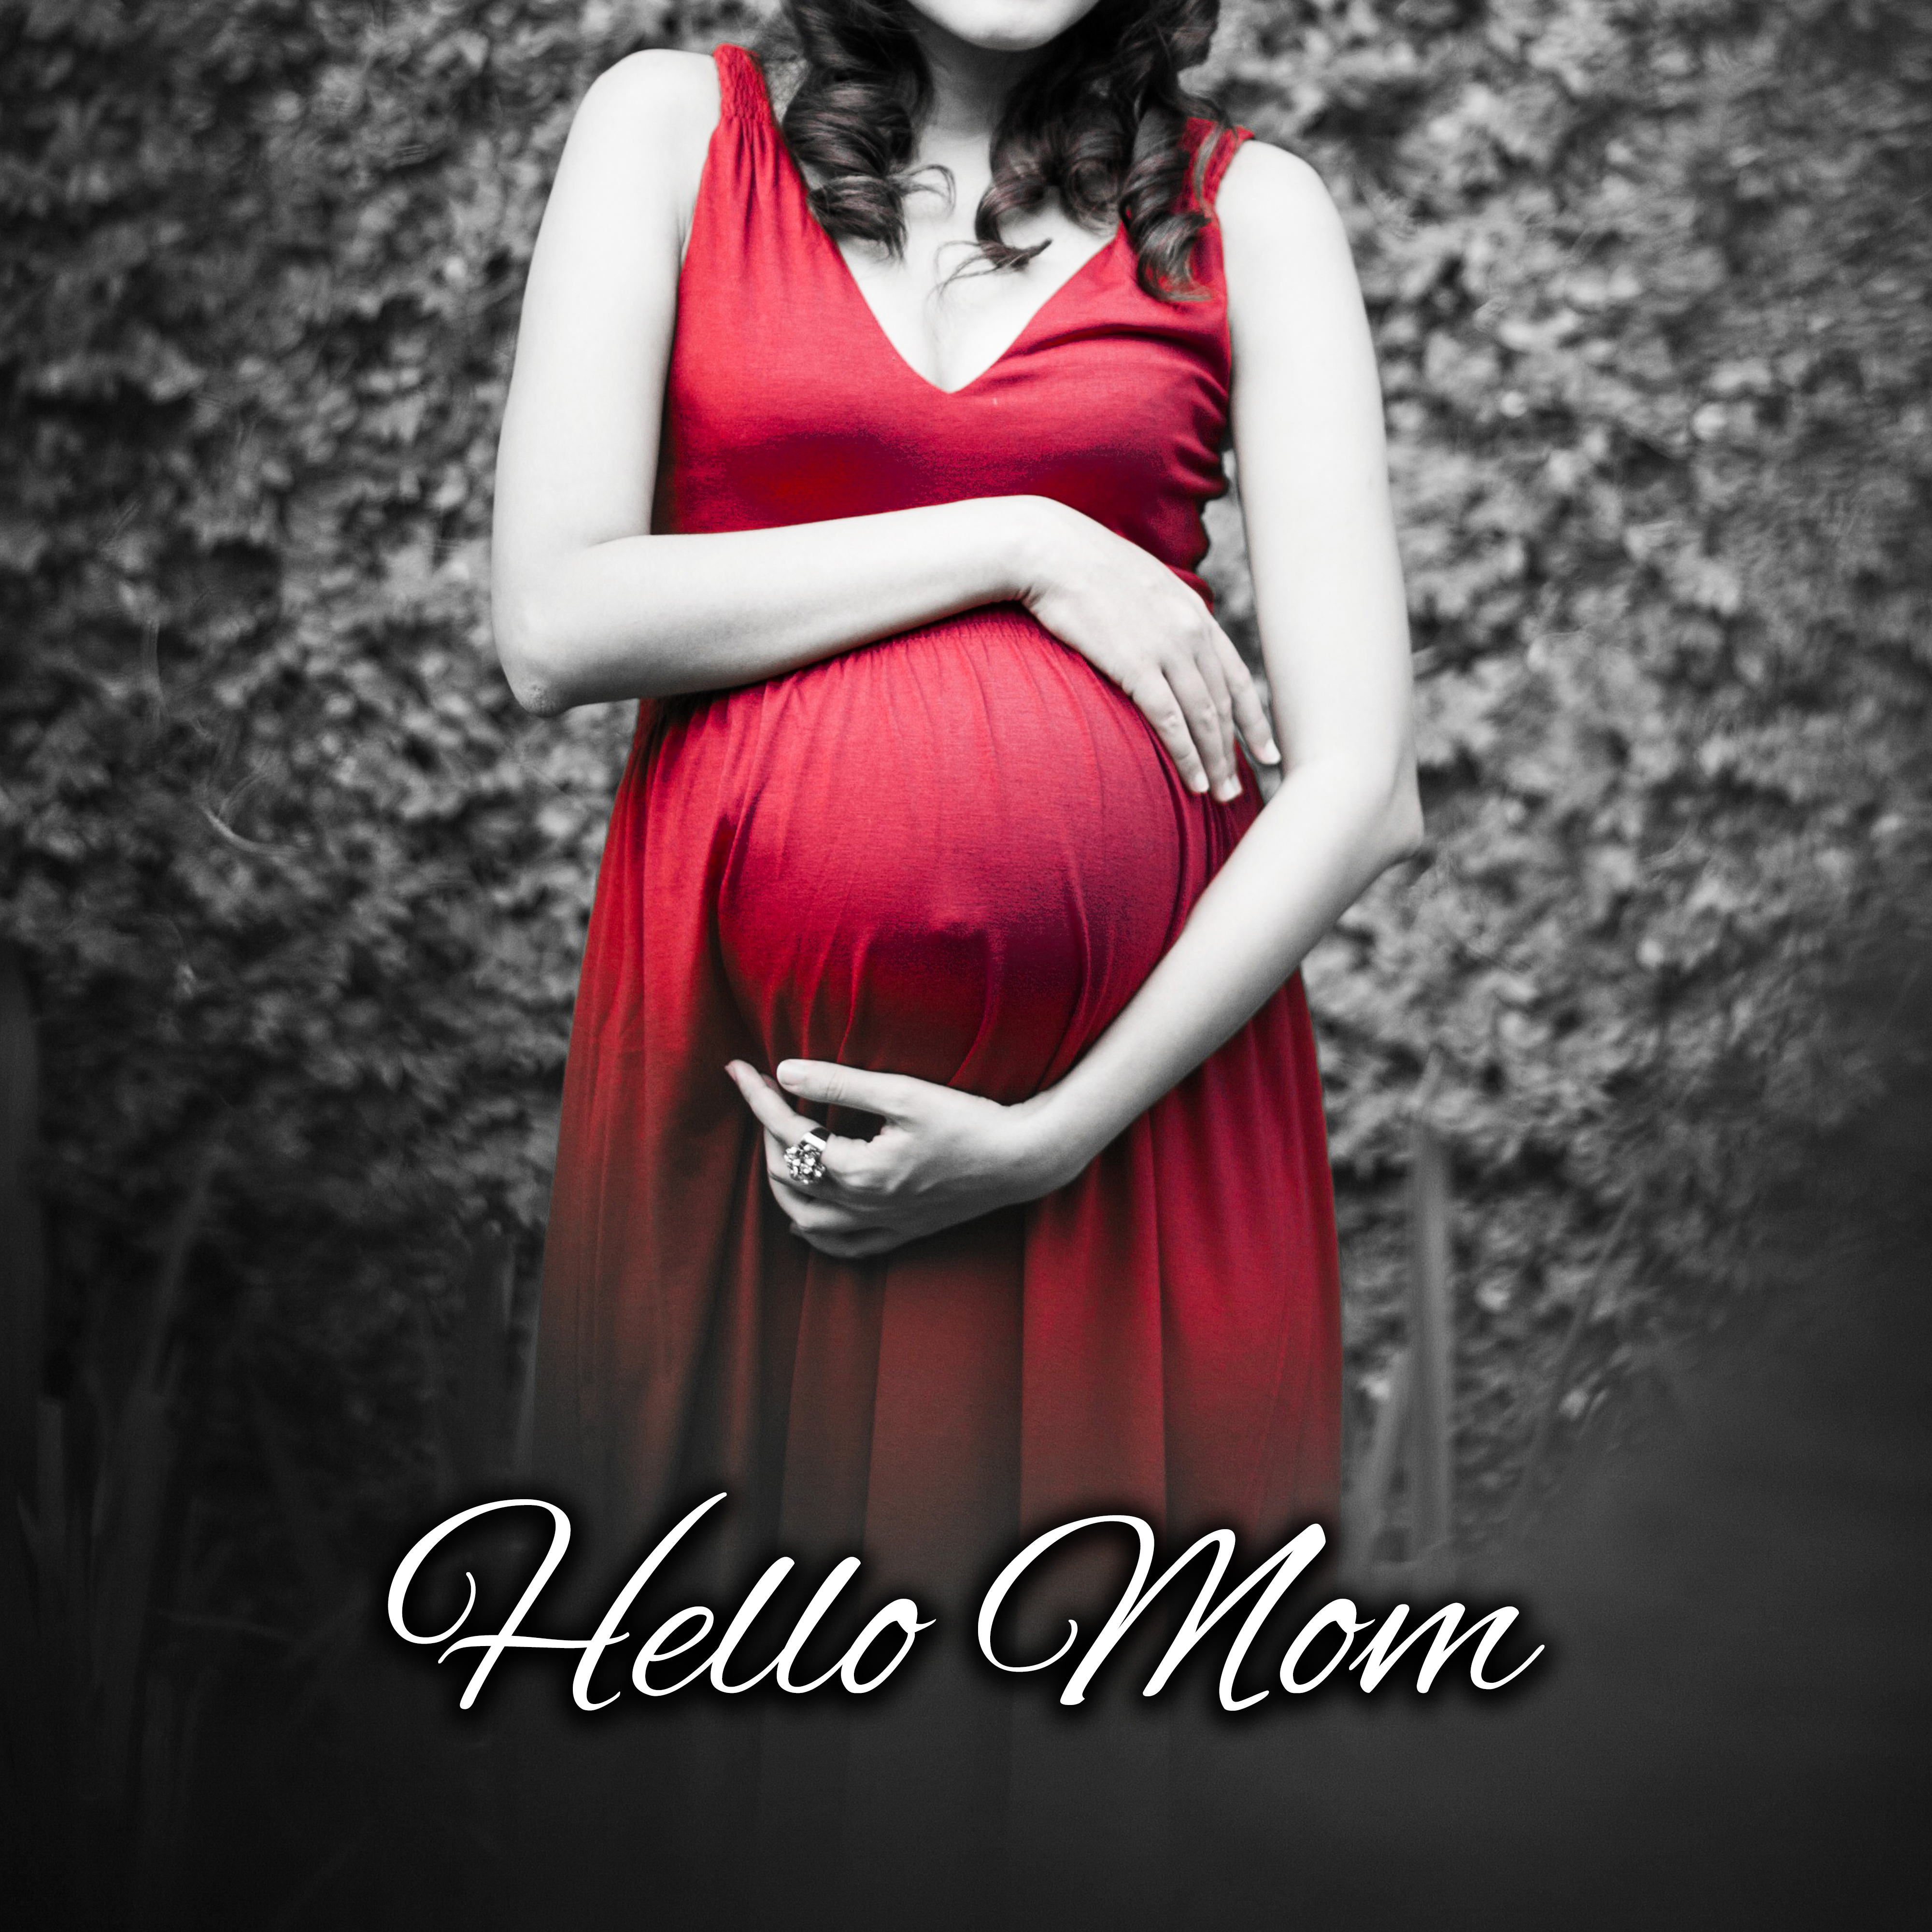 Hello Mom – Peaceful Music for Pregnant Woman, Deep Sleep, Meditation, Pregnancy Music, Soothing Sounds for Relaxation